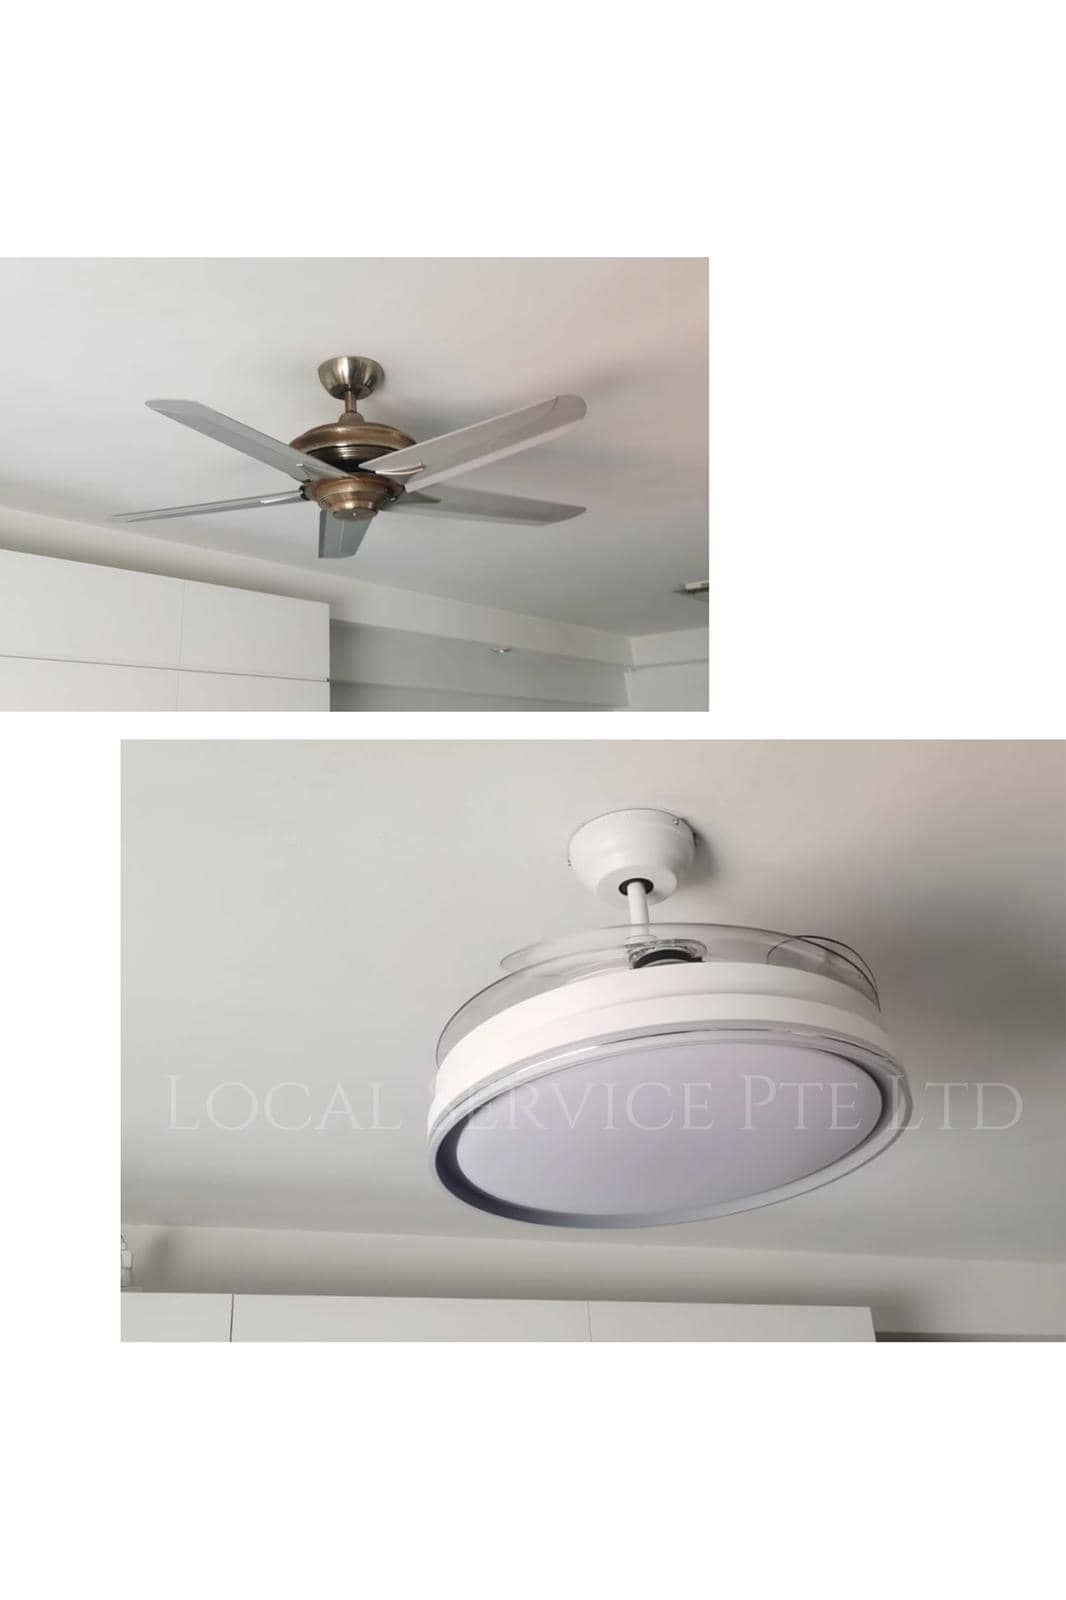 Help To Replace Ceiling Fan